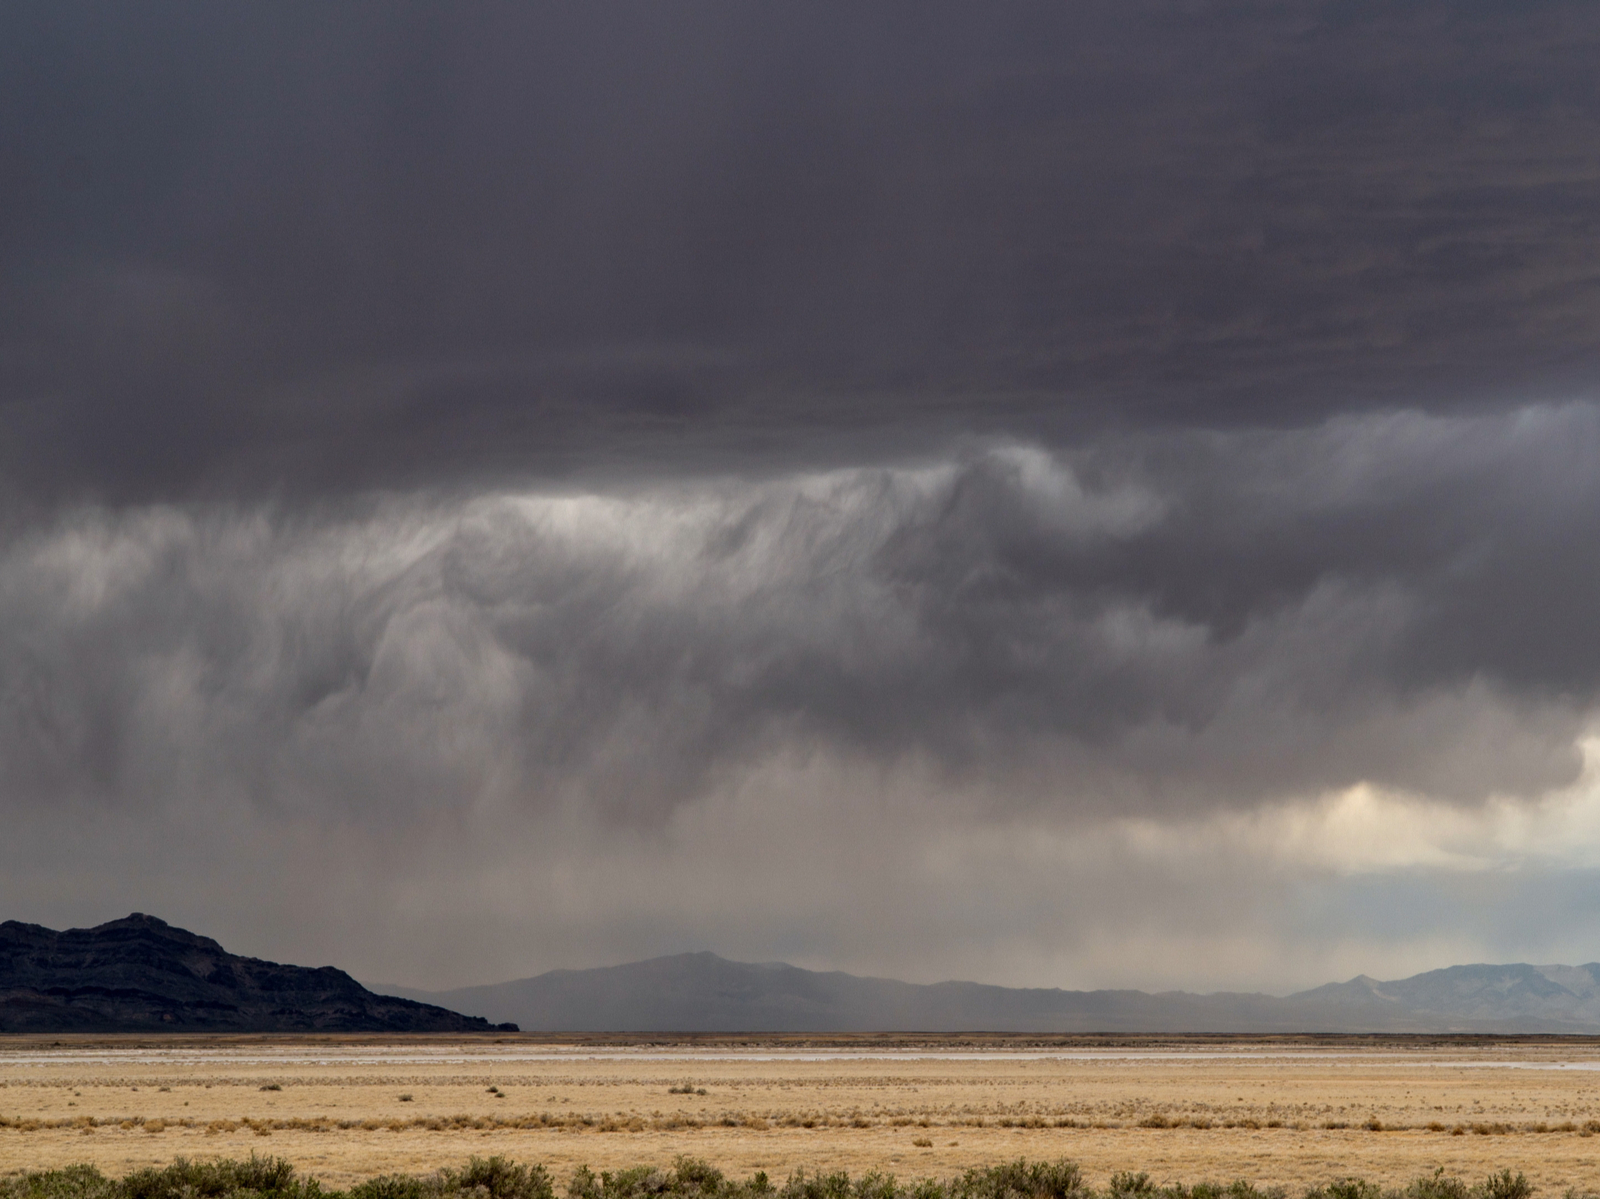 Storm with rain over the plains during the worst time to visit Utah